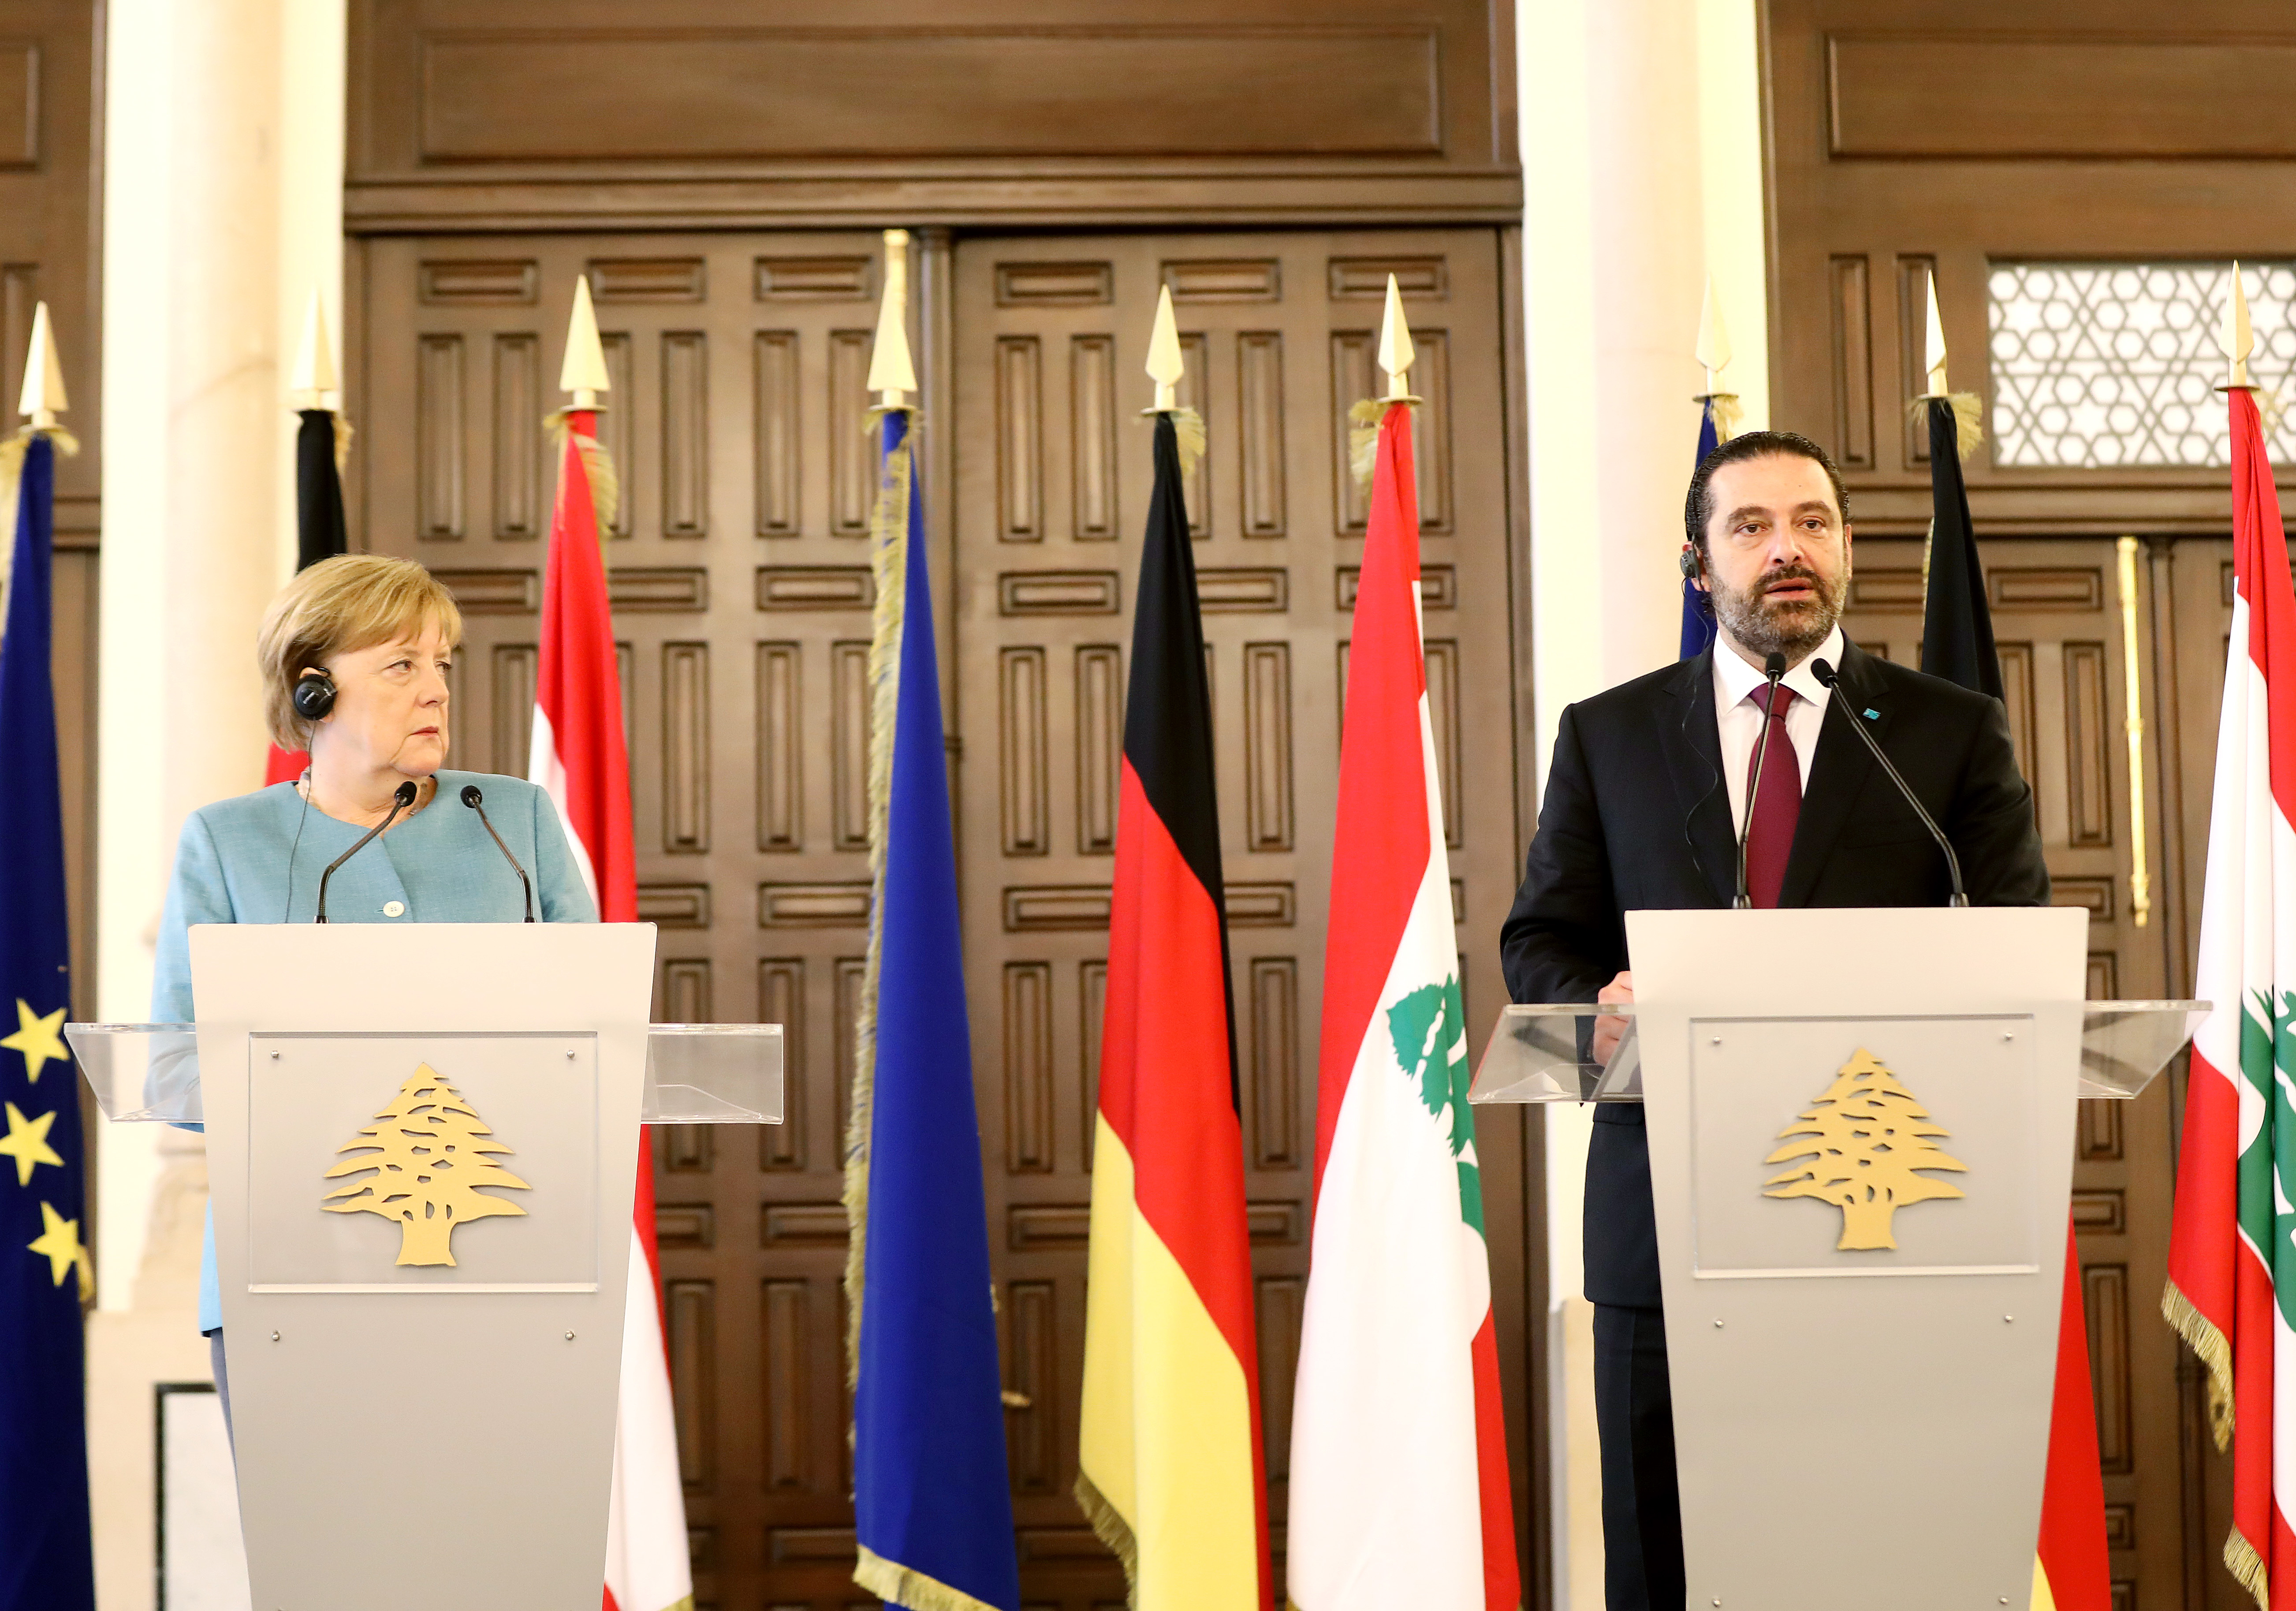 Germany's Chancellor Angela Merkel during the joint press conference with Prime Minister-designate Saad Al-Hariri